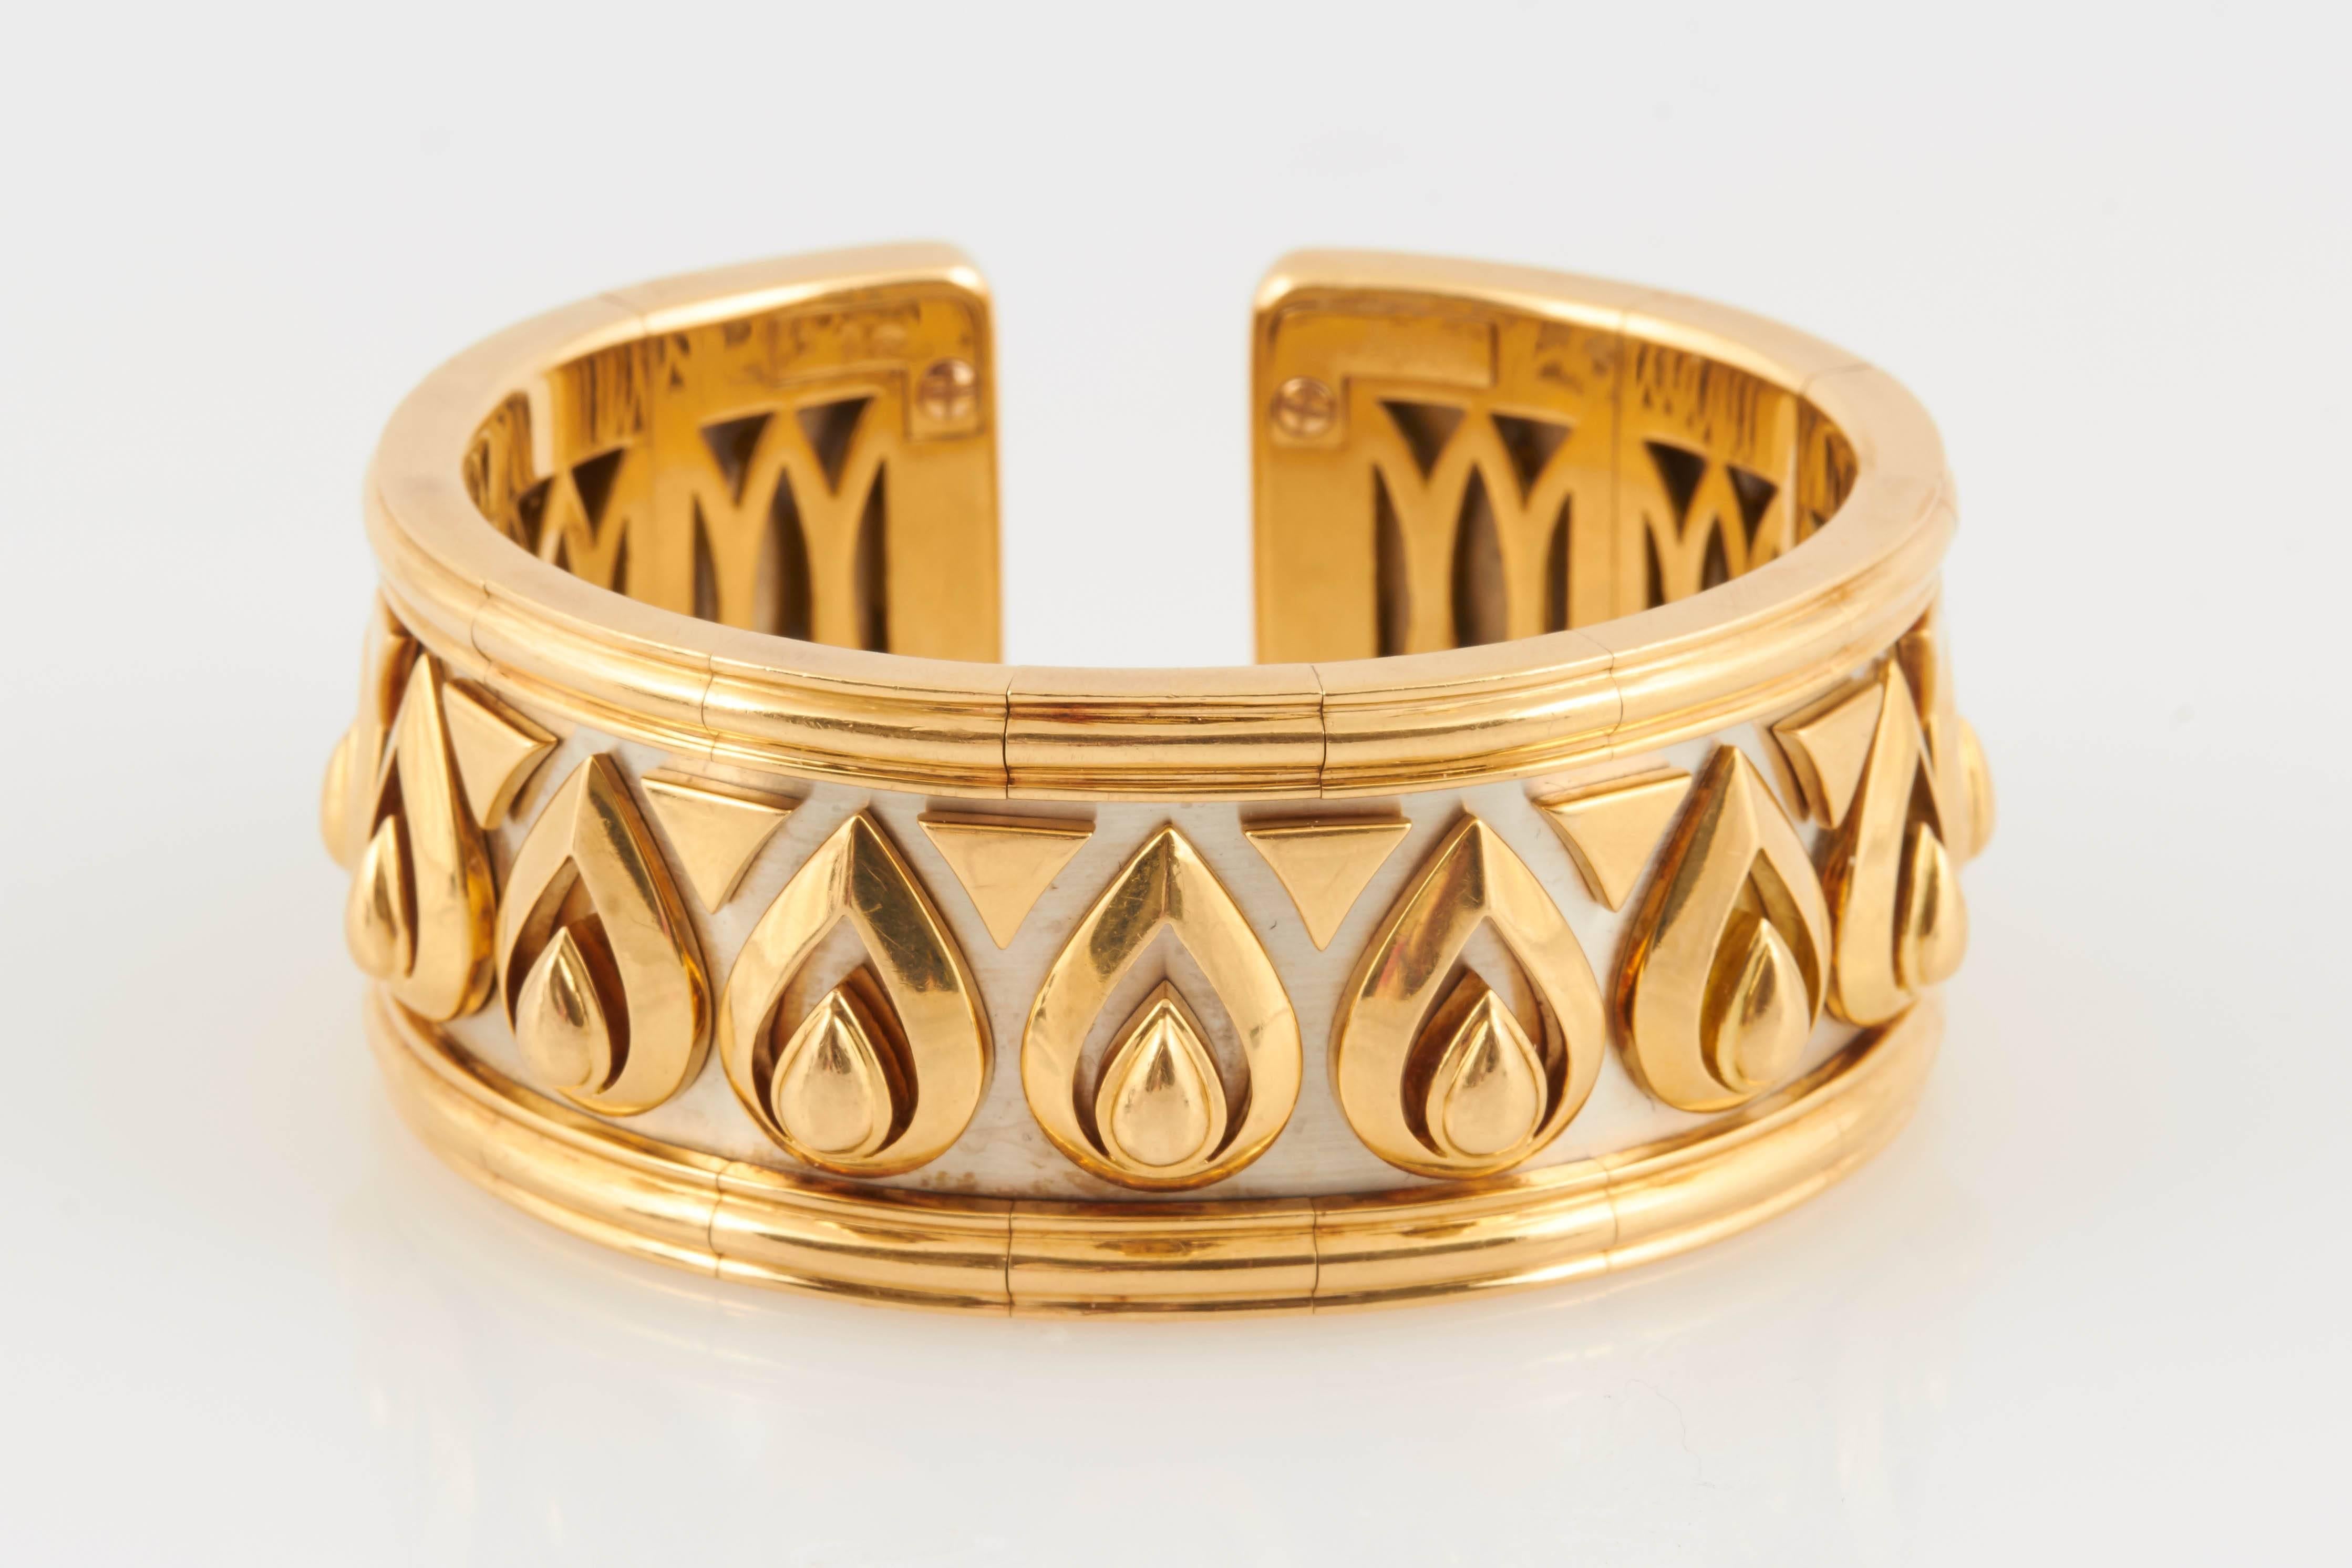 Finely crafted in 18k white and yellow gold.
Signed by Cartier, from their Walking Panthere collection.
Flexible, fits sizes 6 - 7 1/2 inches
1 inch wide